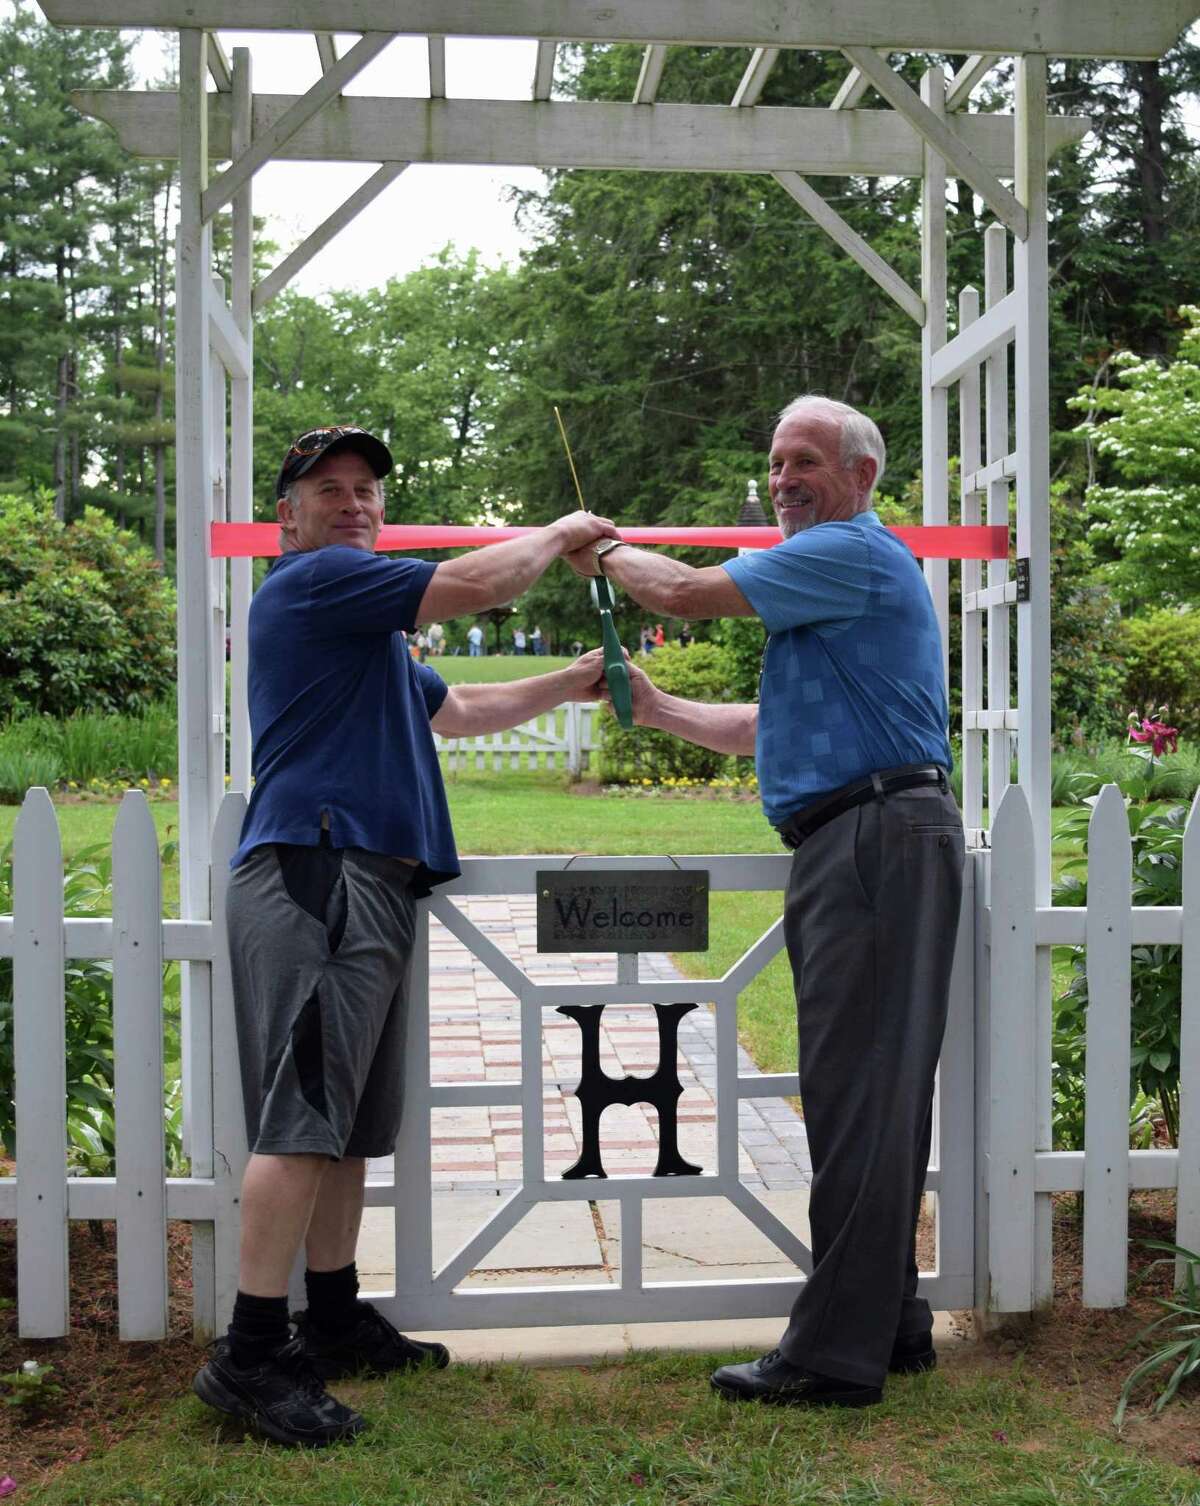 Lee Colville, a member of the Harrybrooke board of managers, right, and his son, Steve, who laid the bricks of a new memorial walkway in the garden at the park with Pete Messer, cut the ribbon at the walkway’s recent dedication ceremony.